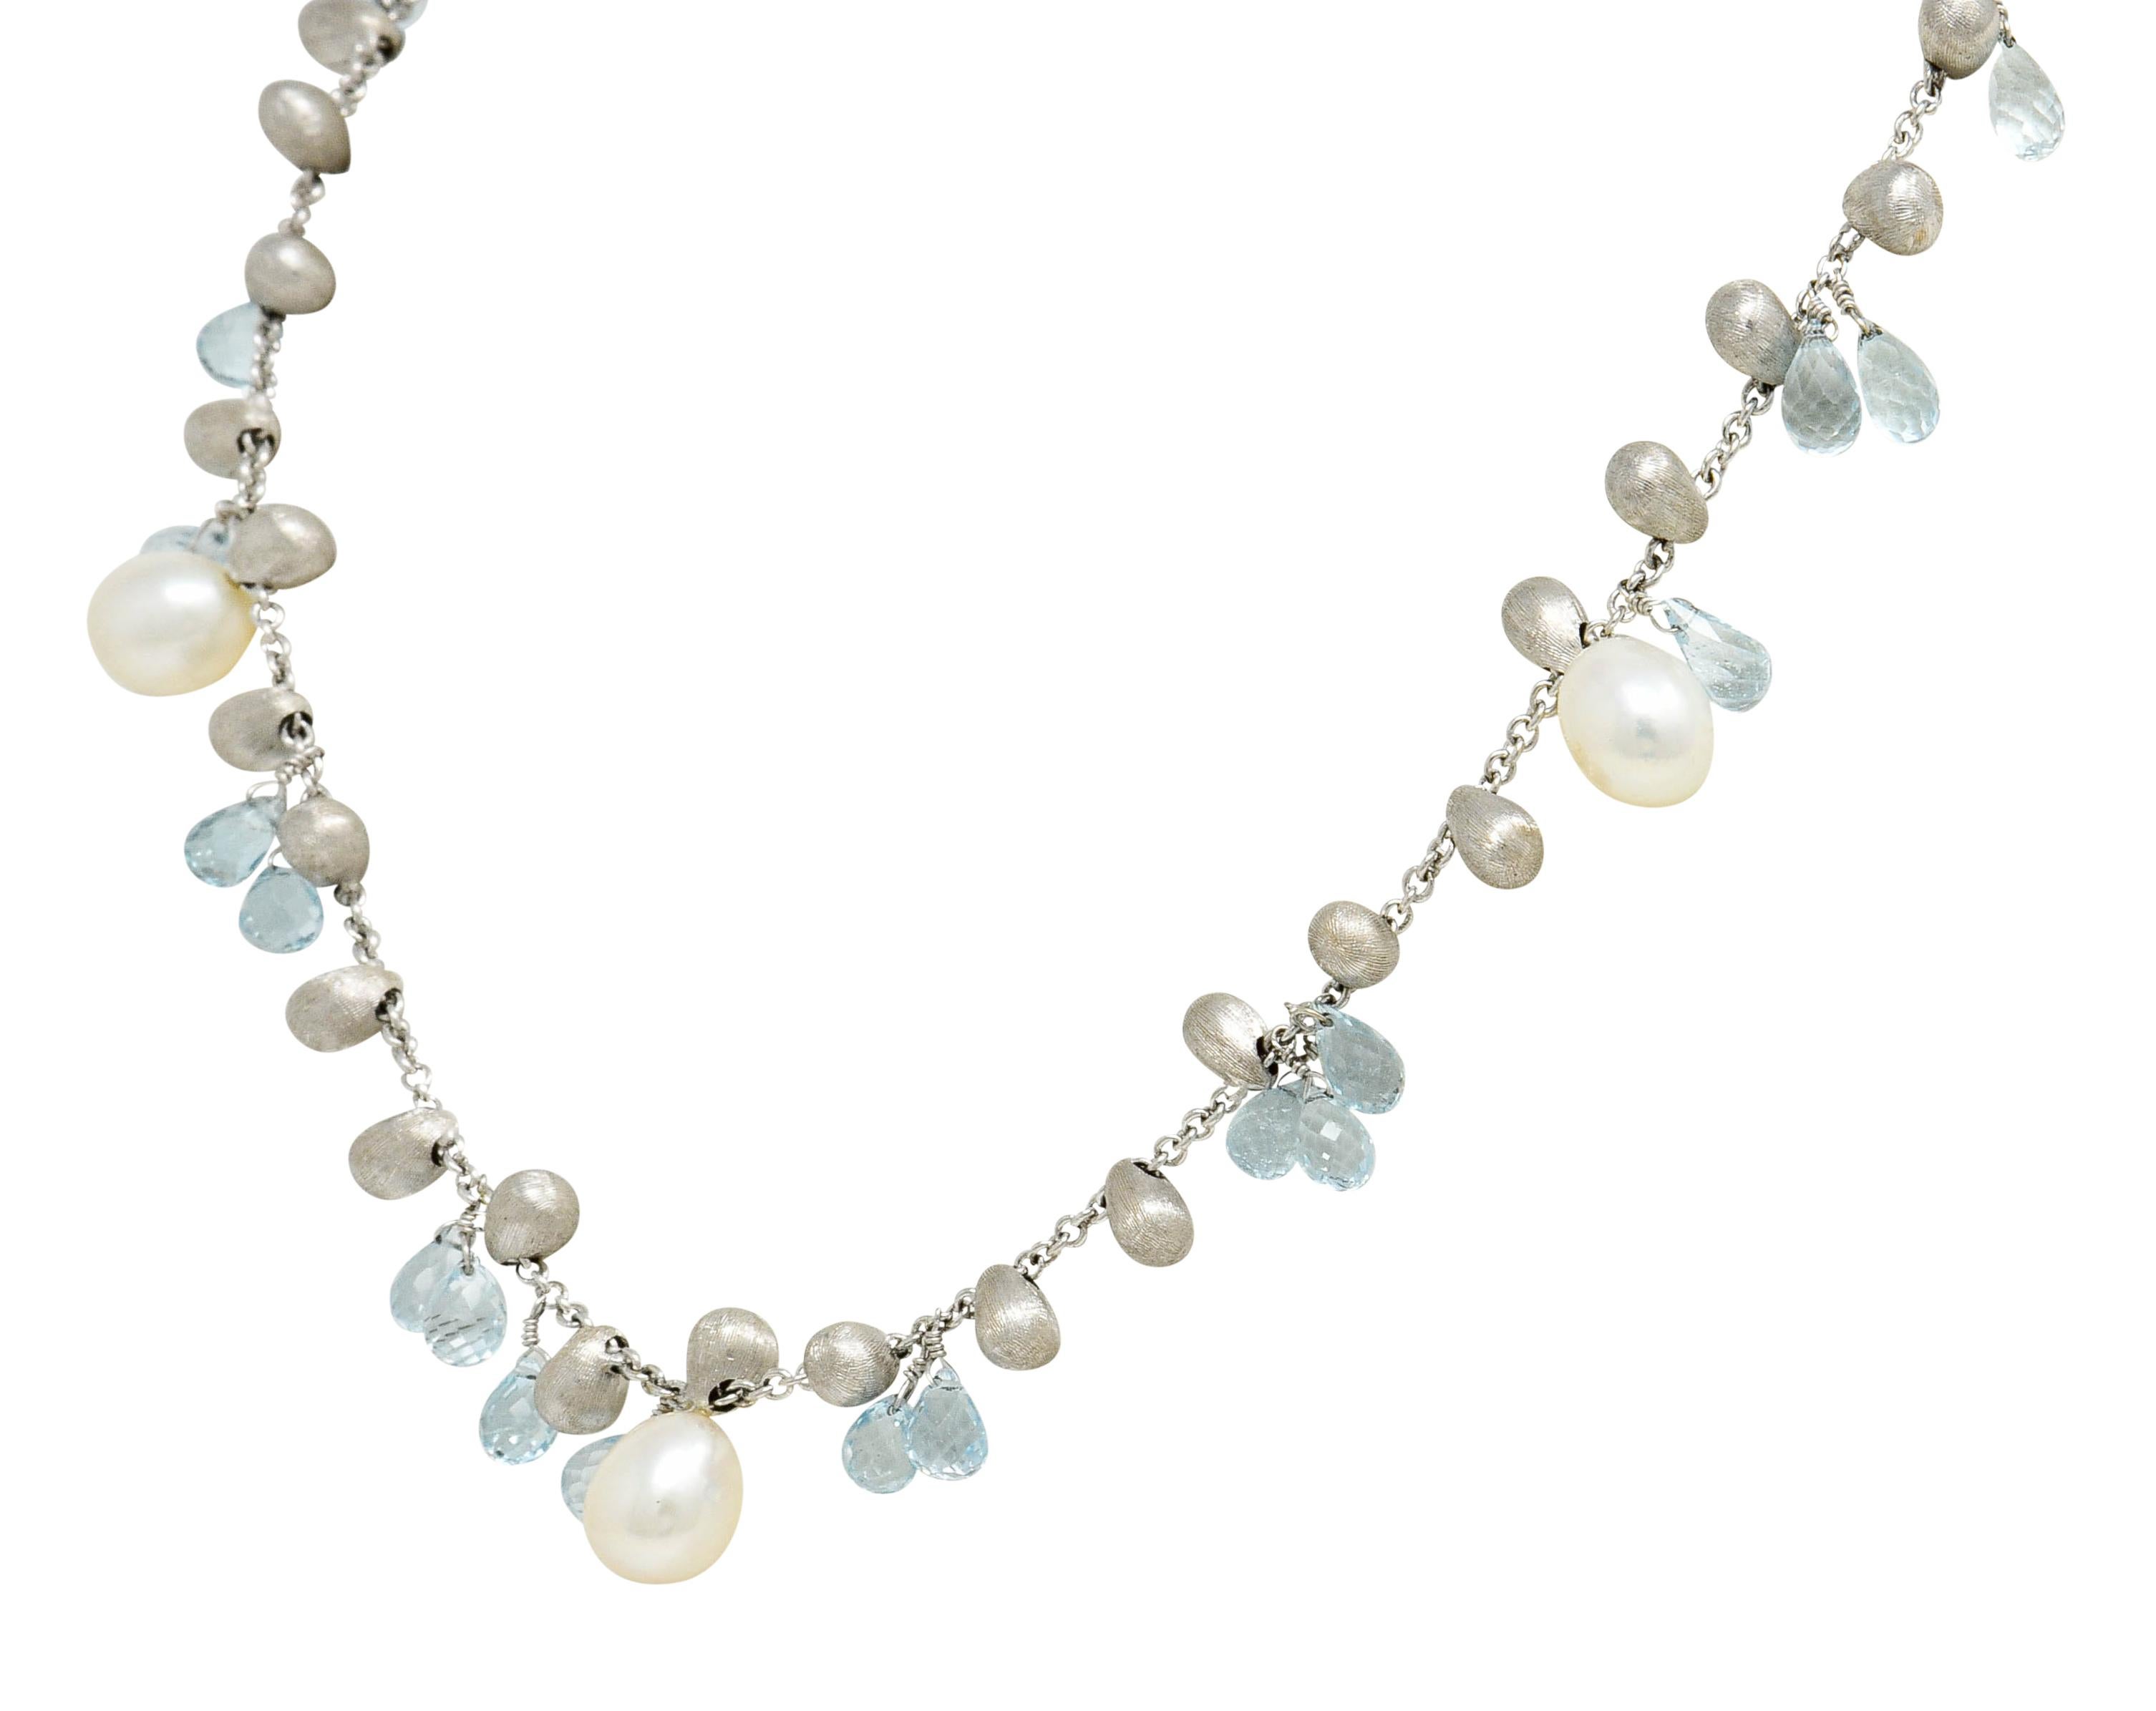 Contemporary Marco Bicego Aquamarine Cultured Pearl 18 Karat White Gold Droplet Necklace